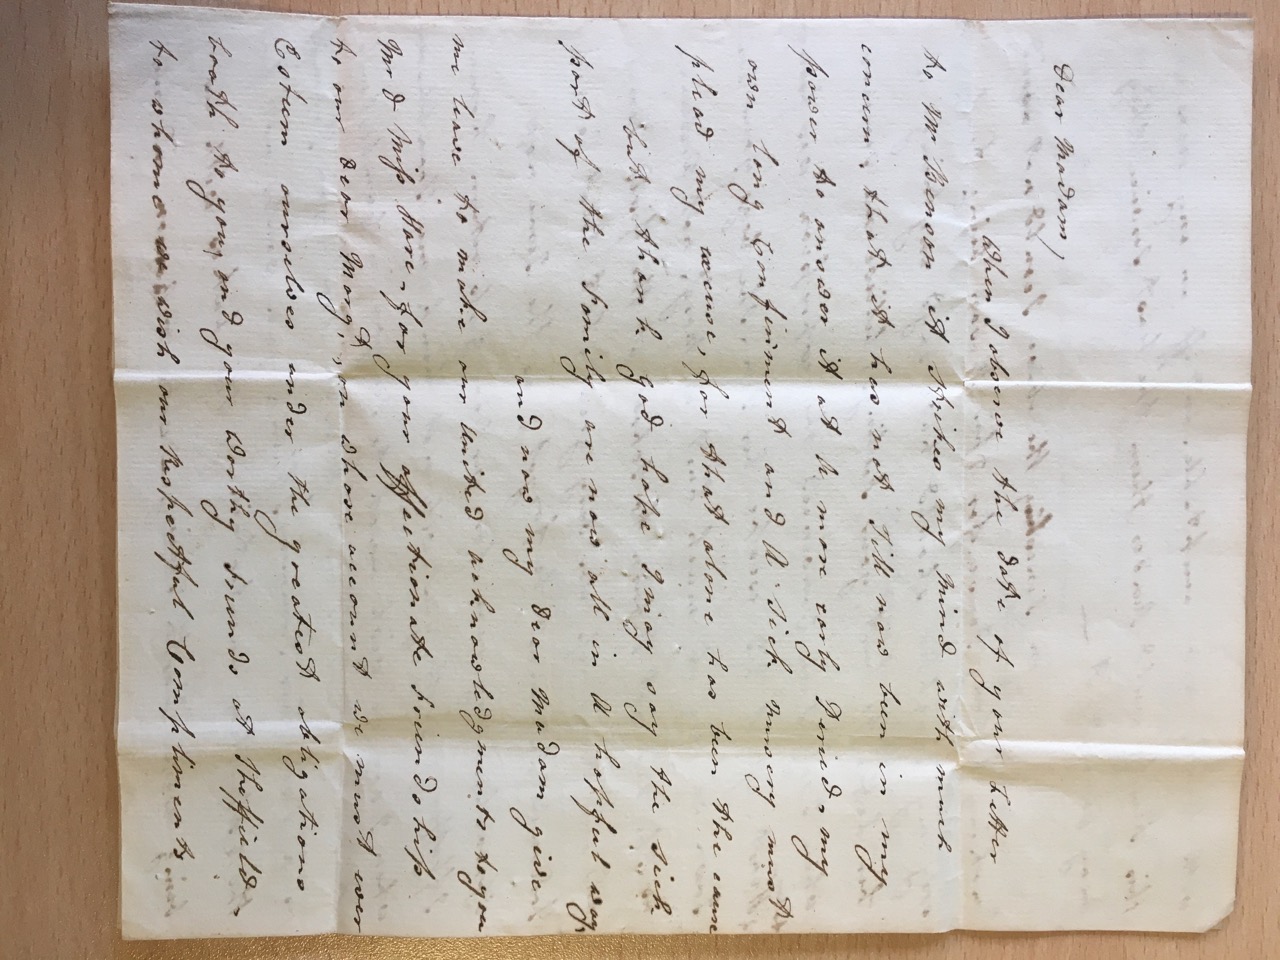 Image #1 of letter: Isabella Benson to Ann Hare, 15 April 1785